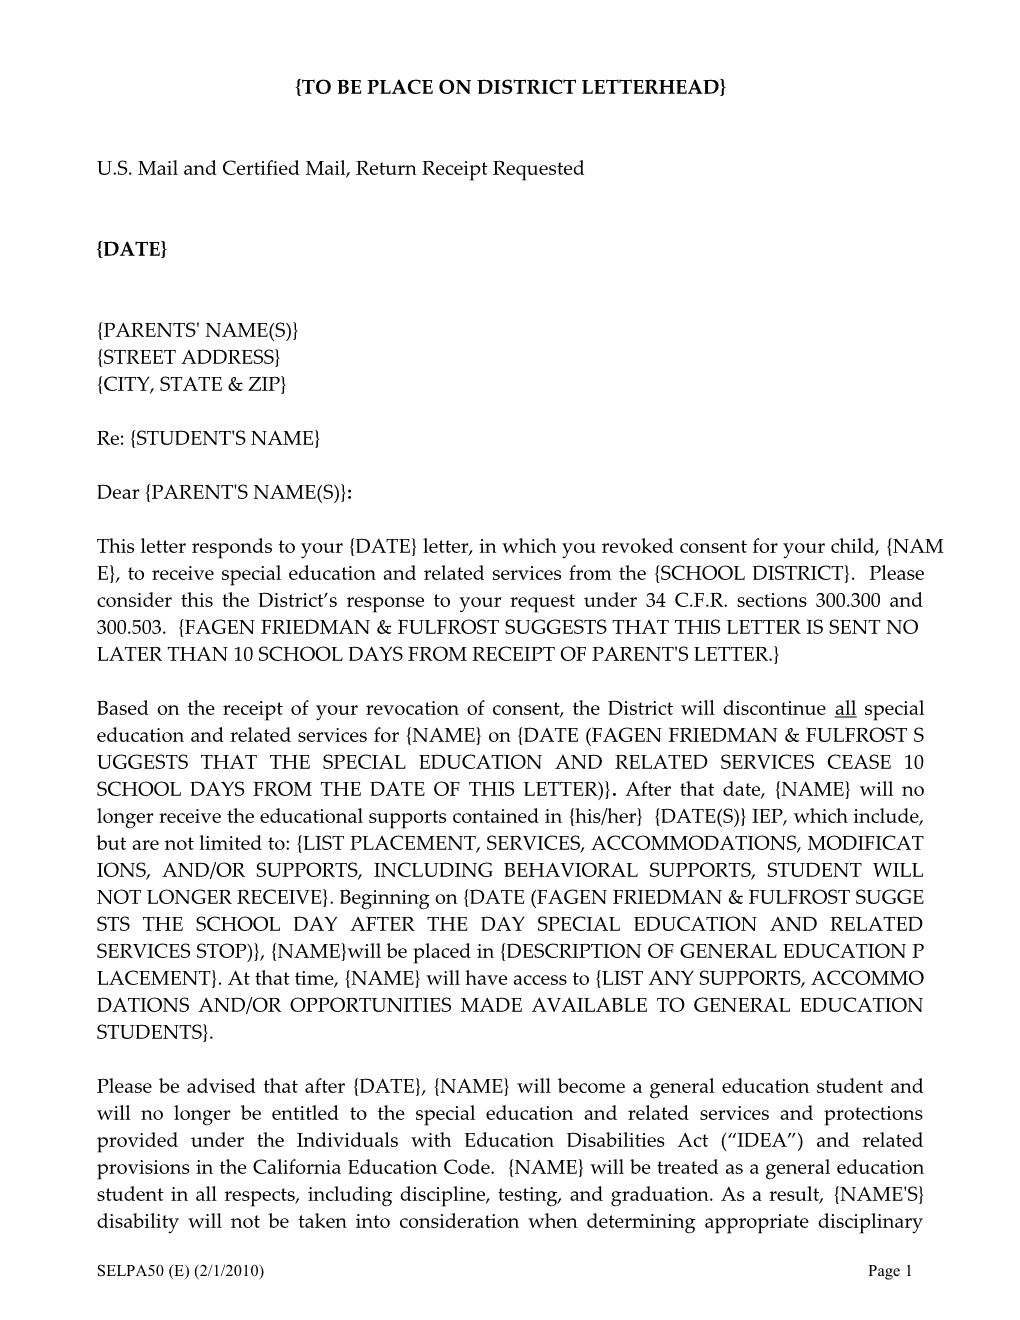 Sample Prior Written Notice Letter to Be Used When Parent Revokes Consent to Special Education